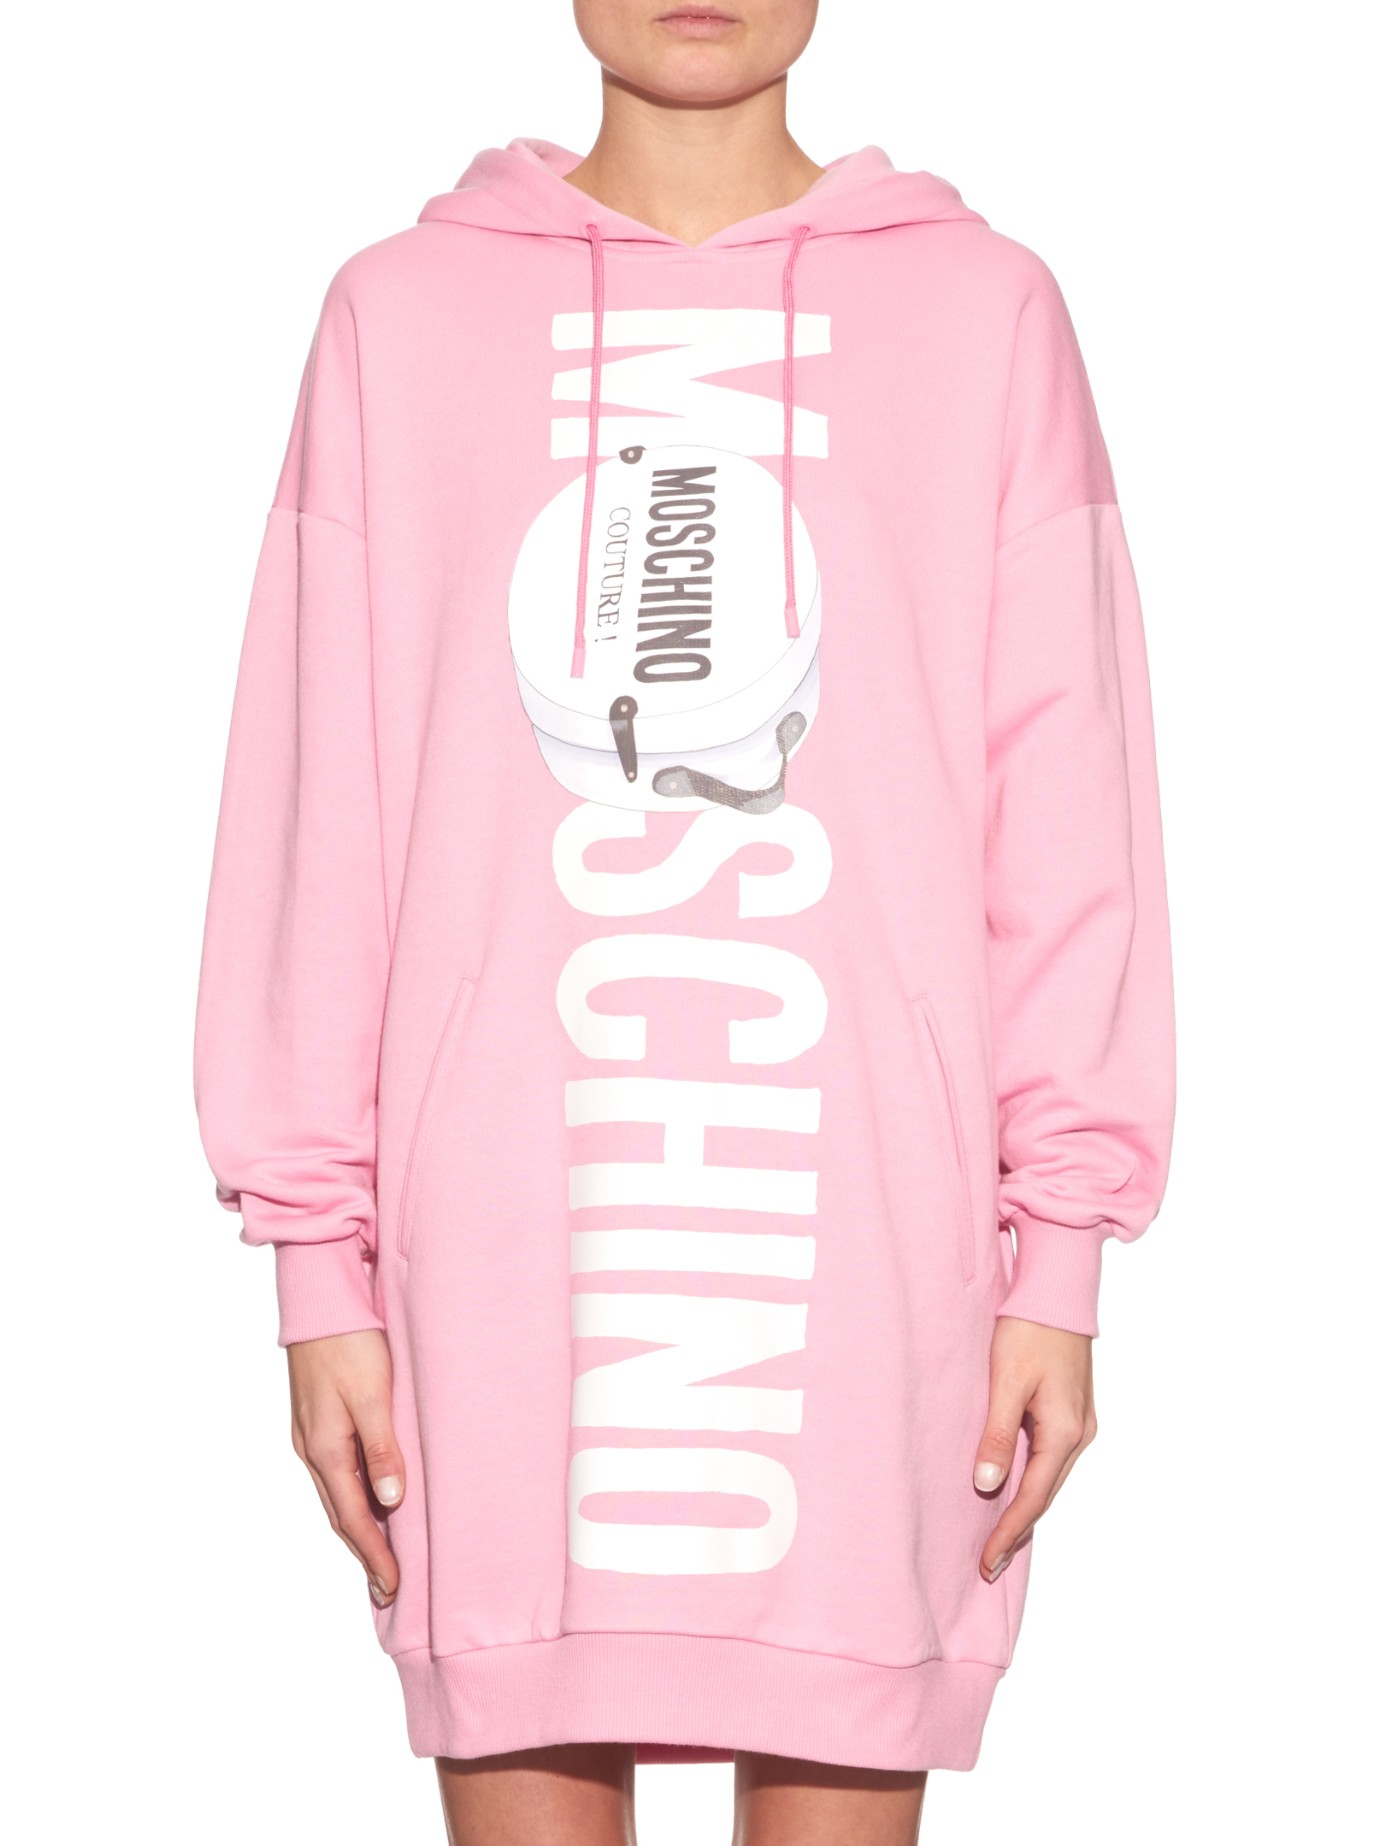 Moschino Hooded Dress Sale, 59% OFF ...